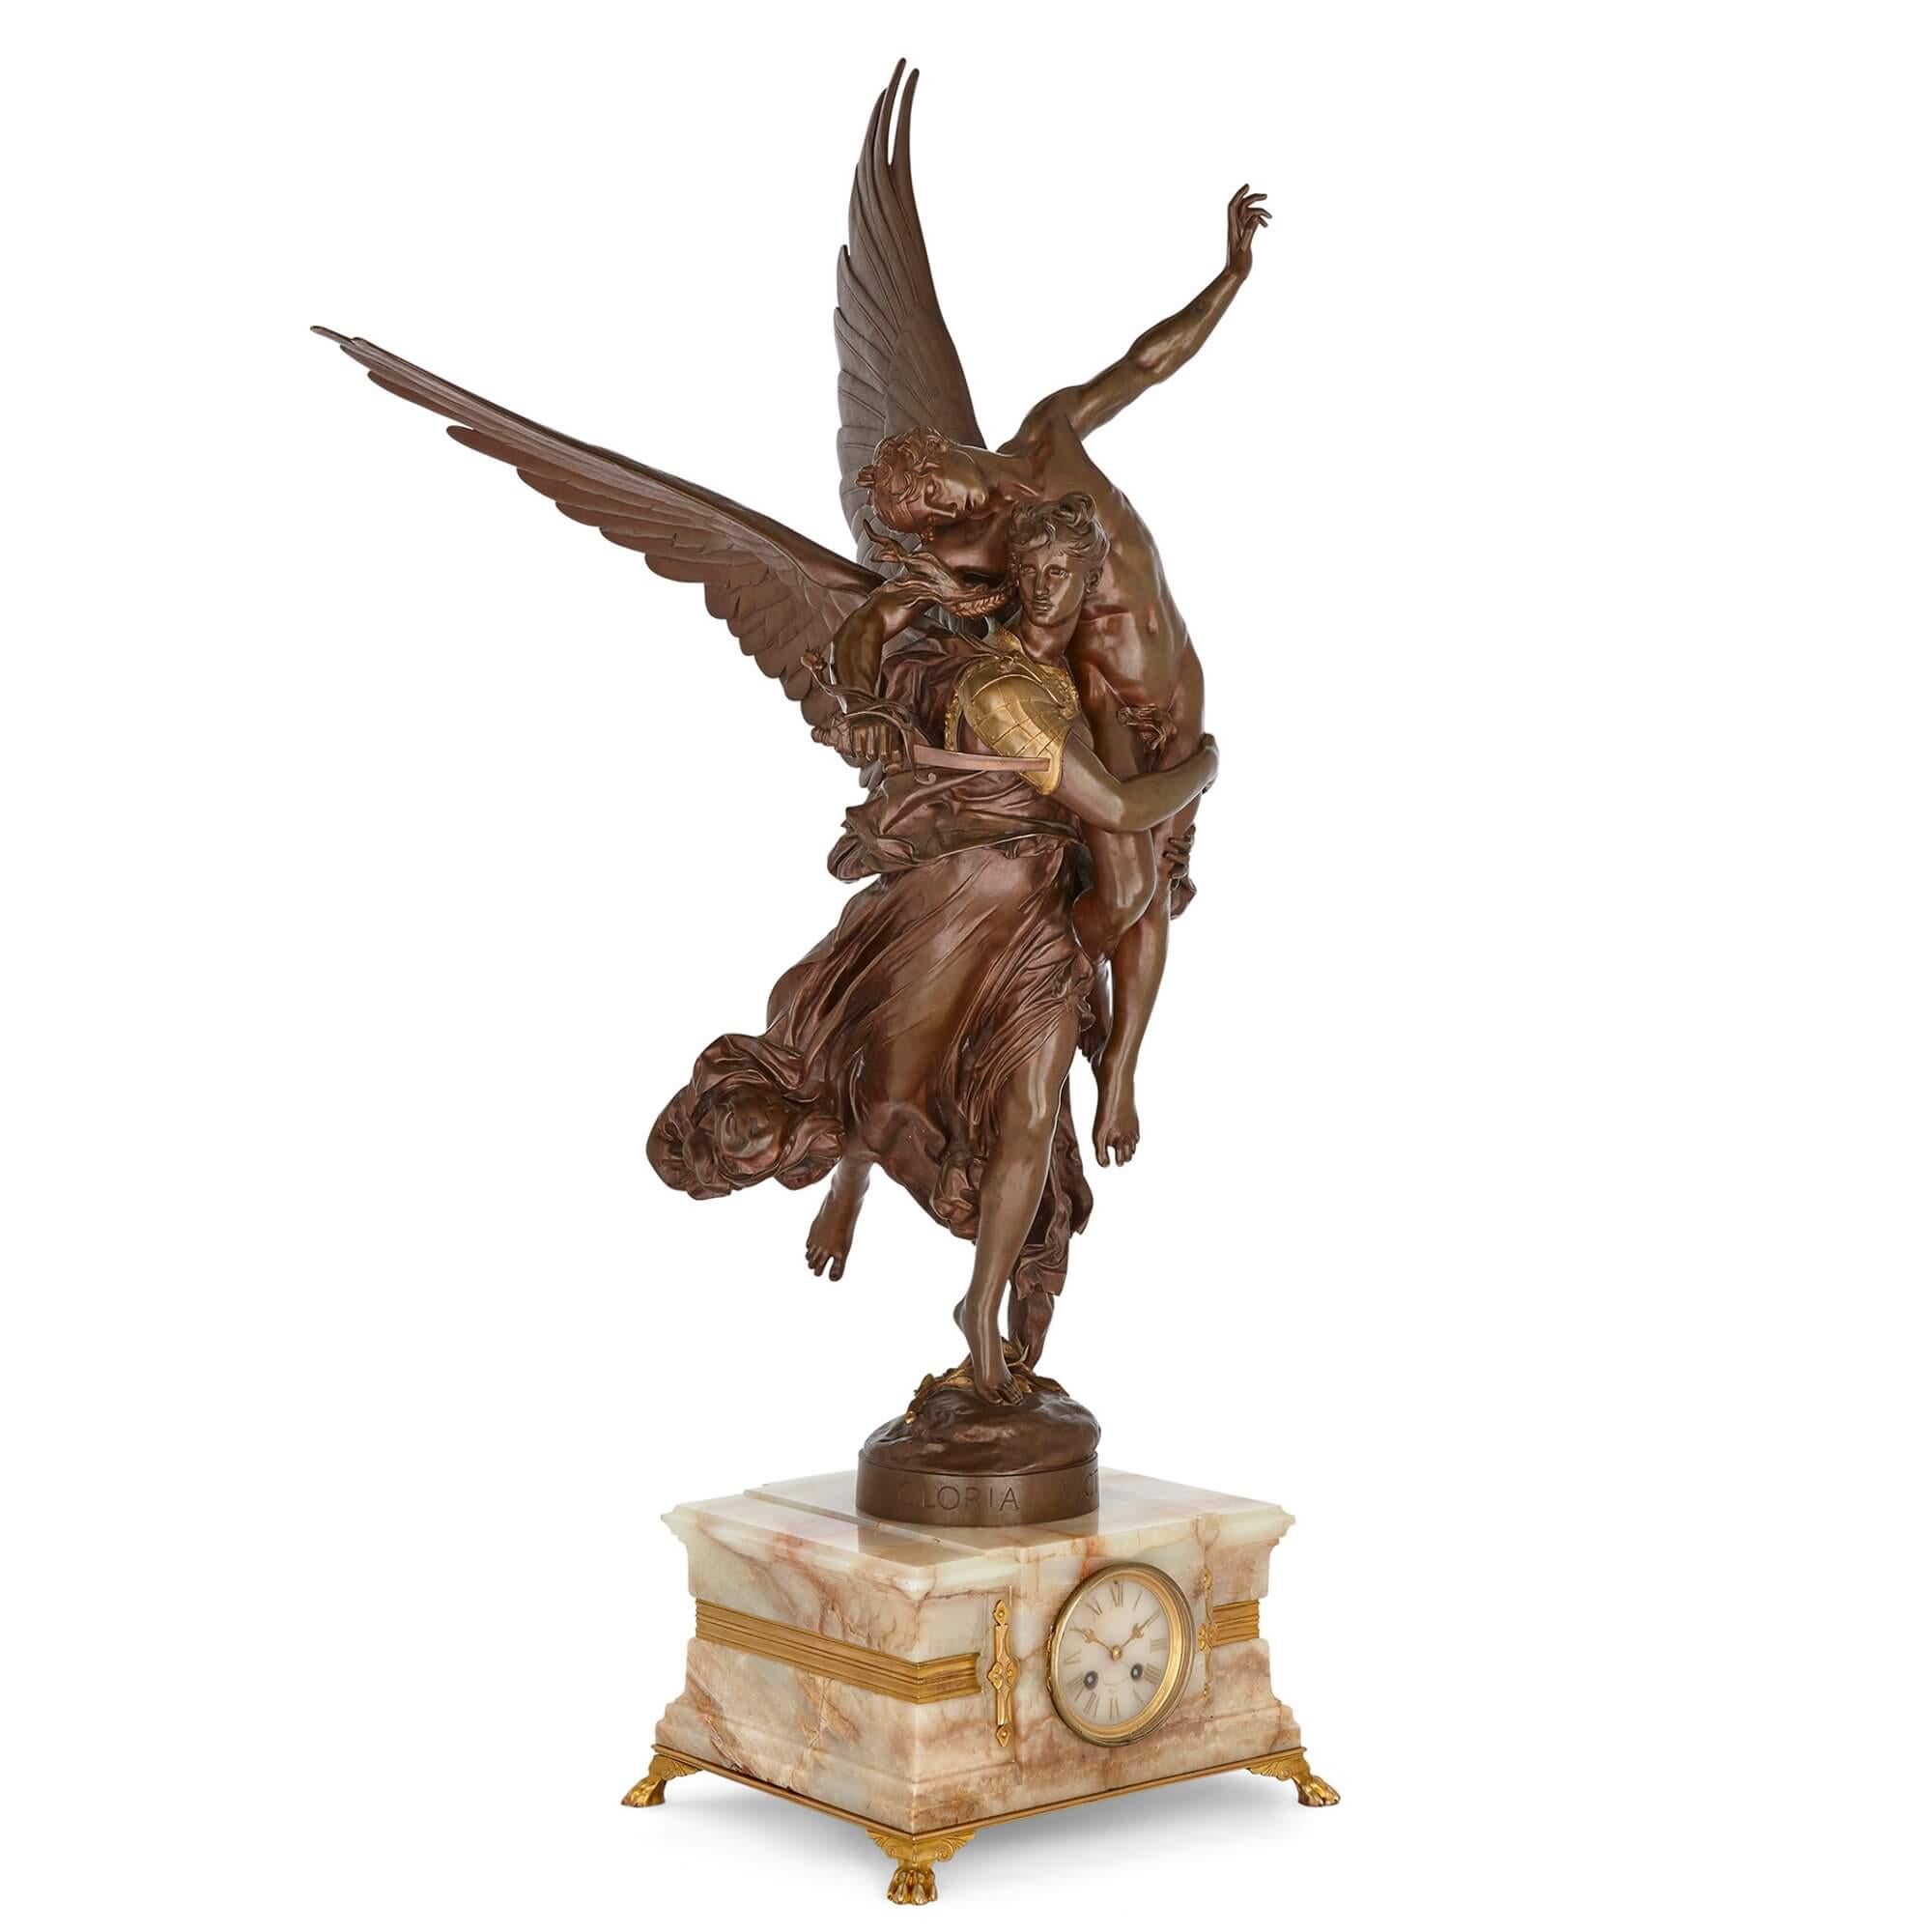 Antique patinated bronze and onyx mantel clock by Mercié and Barbedienne
French, Late 19th Century 
Height 113cm, width 58cm, depth 40cm

Two renowned French makers, Antonin Mercié (1845-1916) and Ferdinand Barbedienne (1810-1892), are responsible